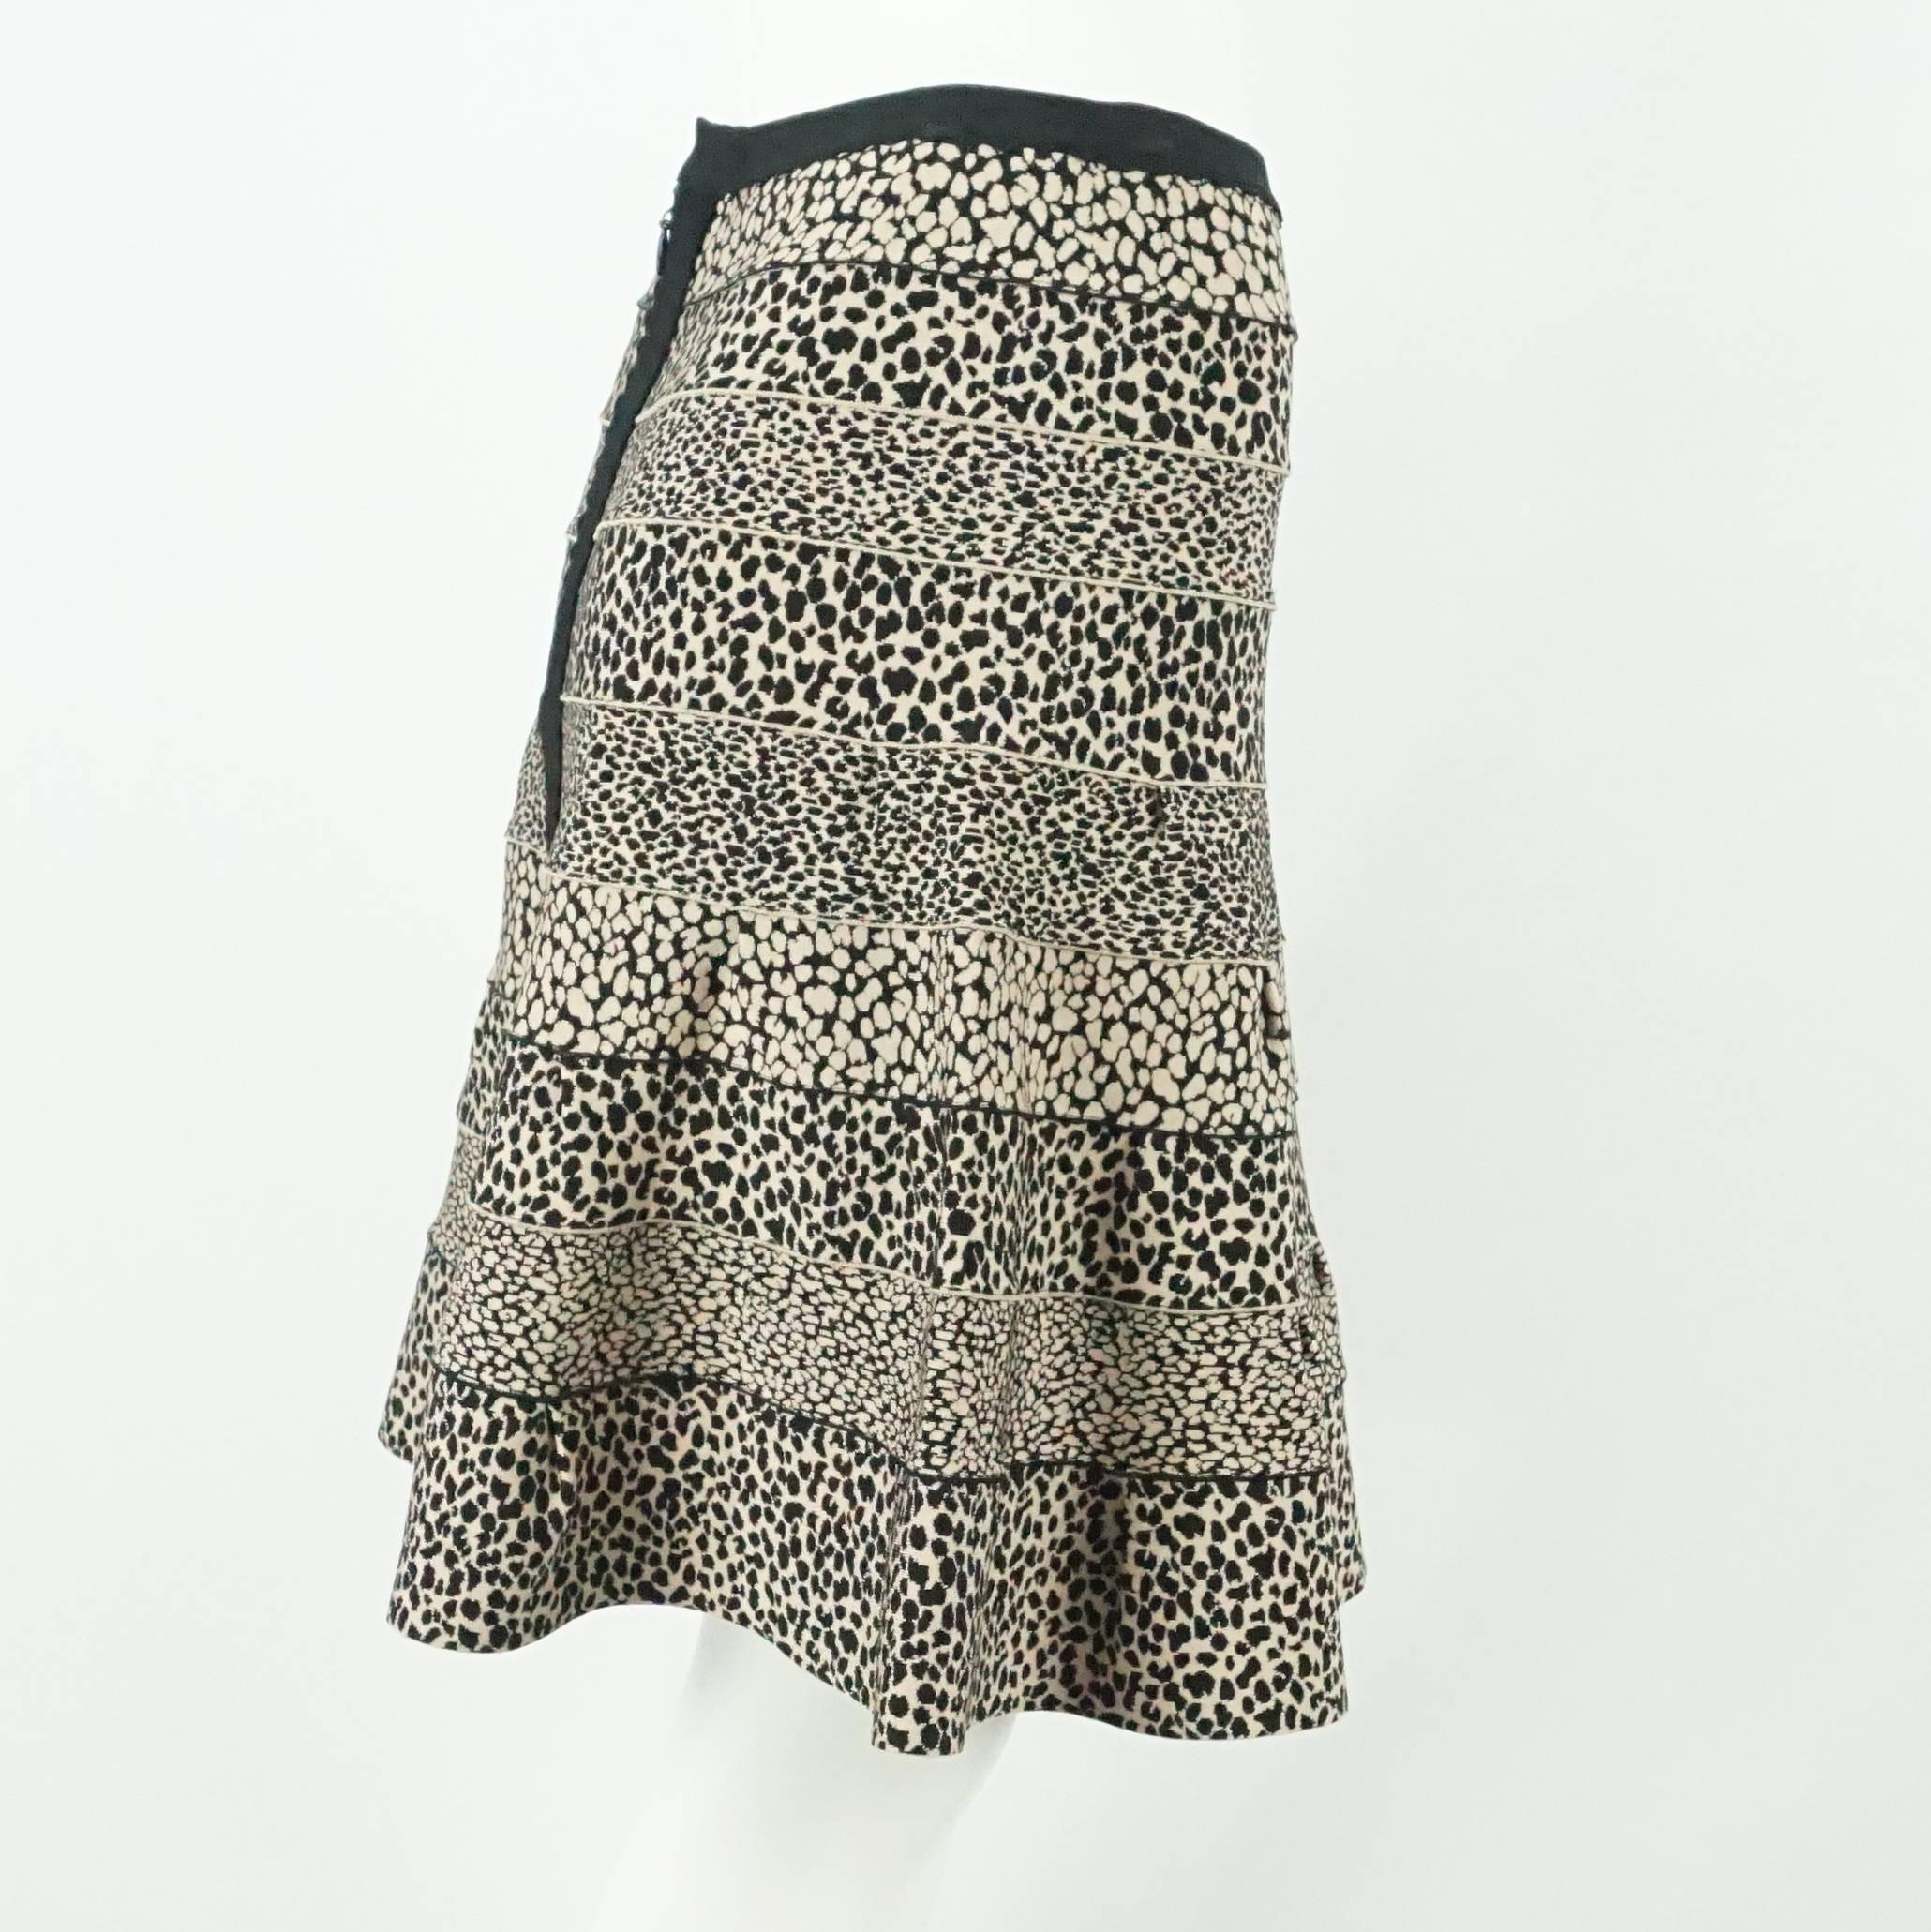 This Herve Leger A-line skirt features a black and tan animal print with a black trim and stripe going down the back where the zipper is. It is made of a rayon-blend bandage material. This skirt is in excellent condition.

Measurements
Waist: